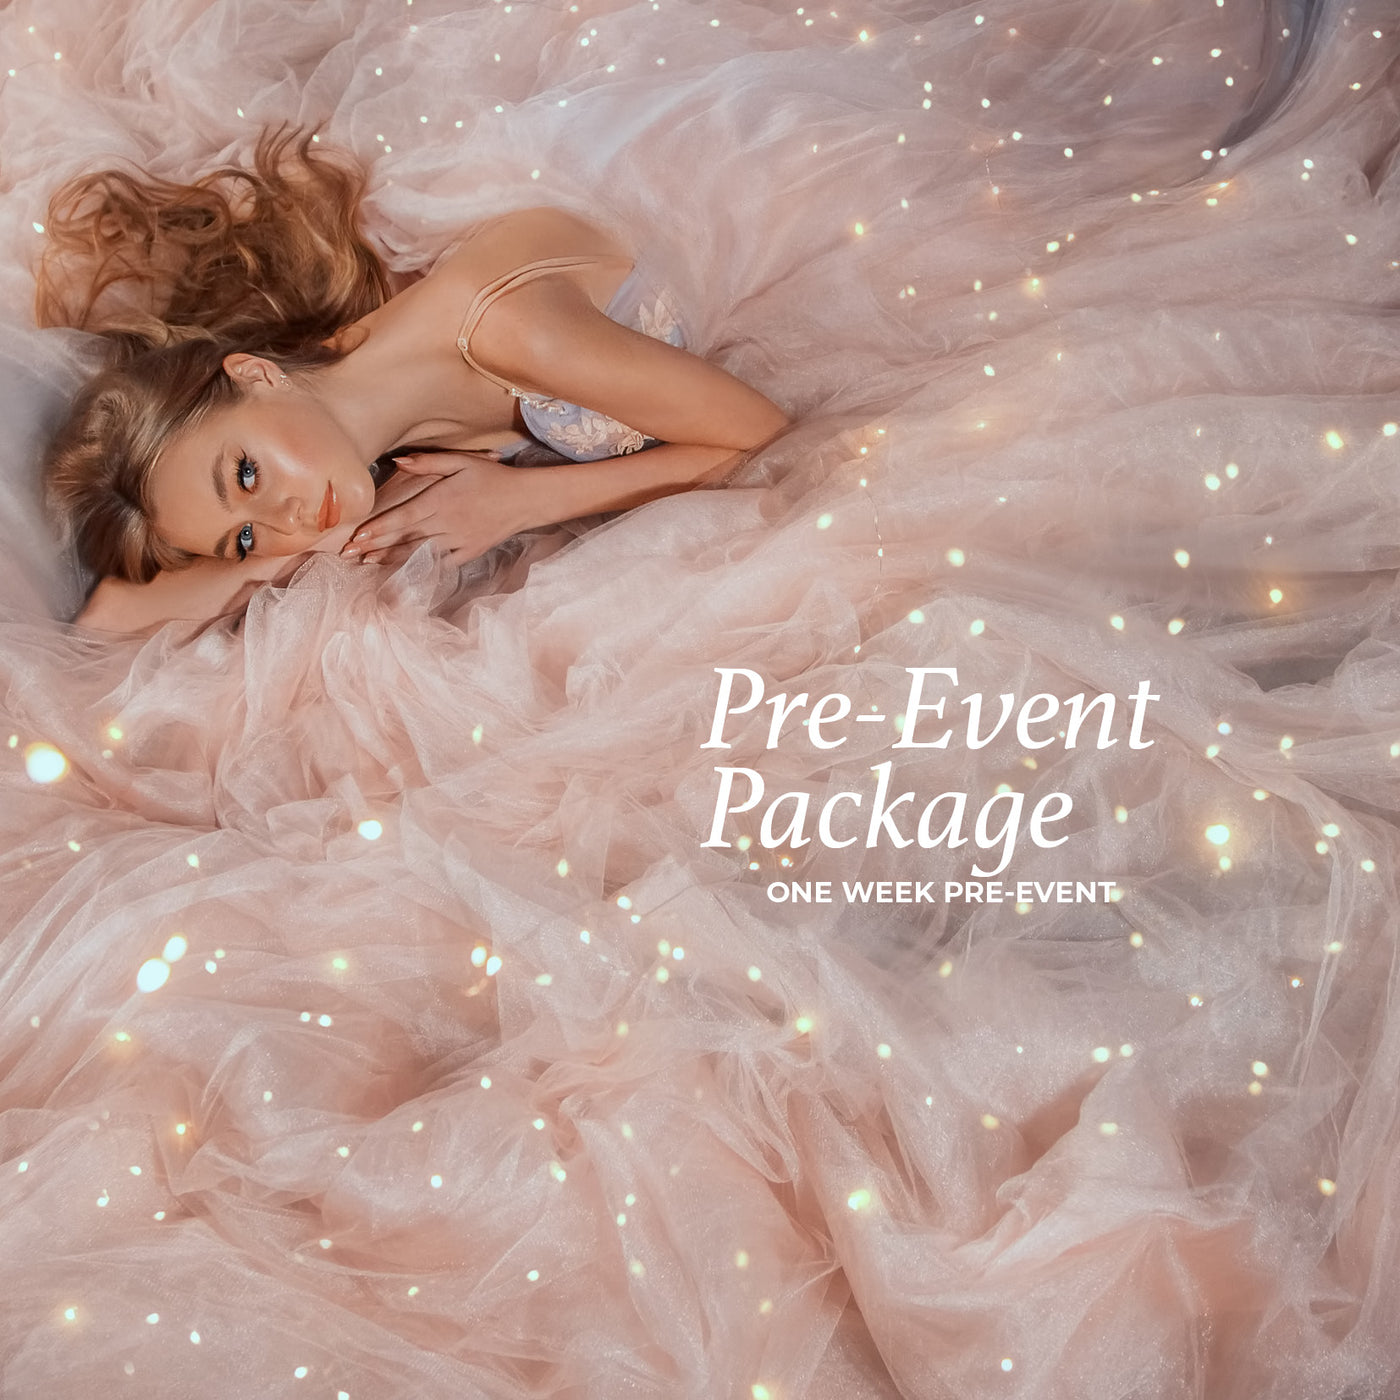 Special Event Package - 10 Days Pre-Event